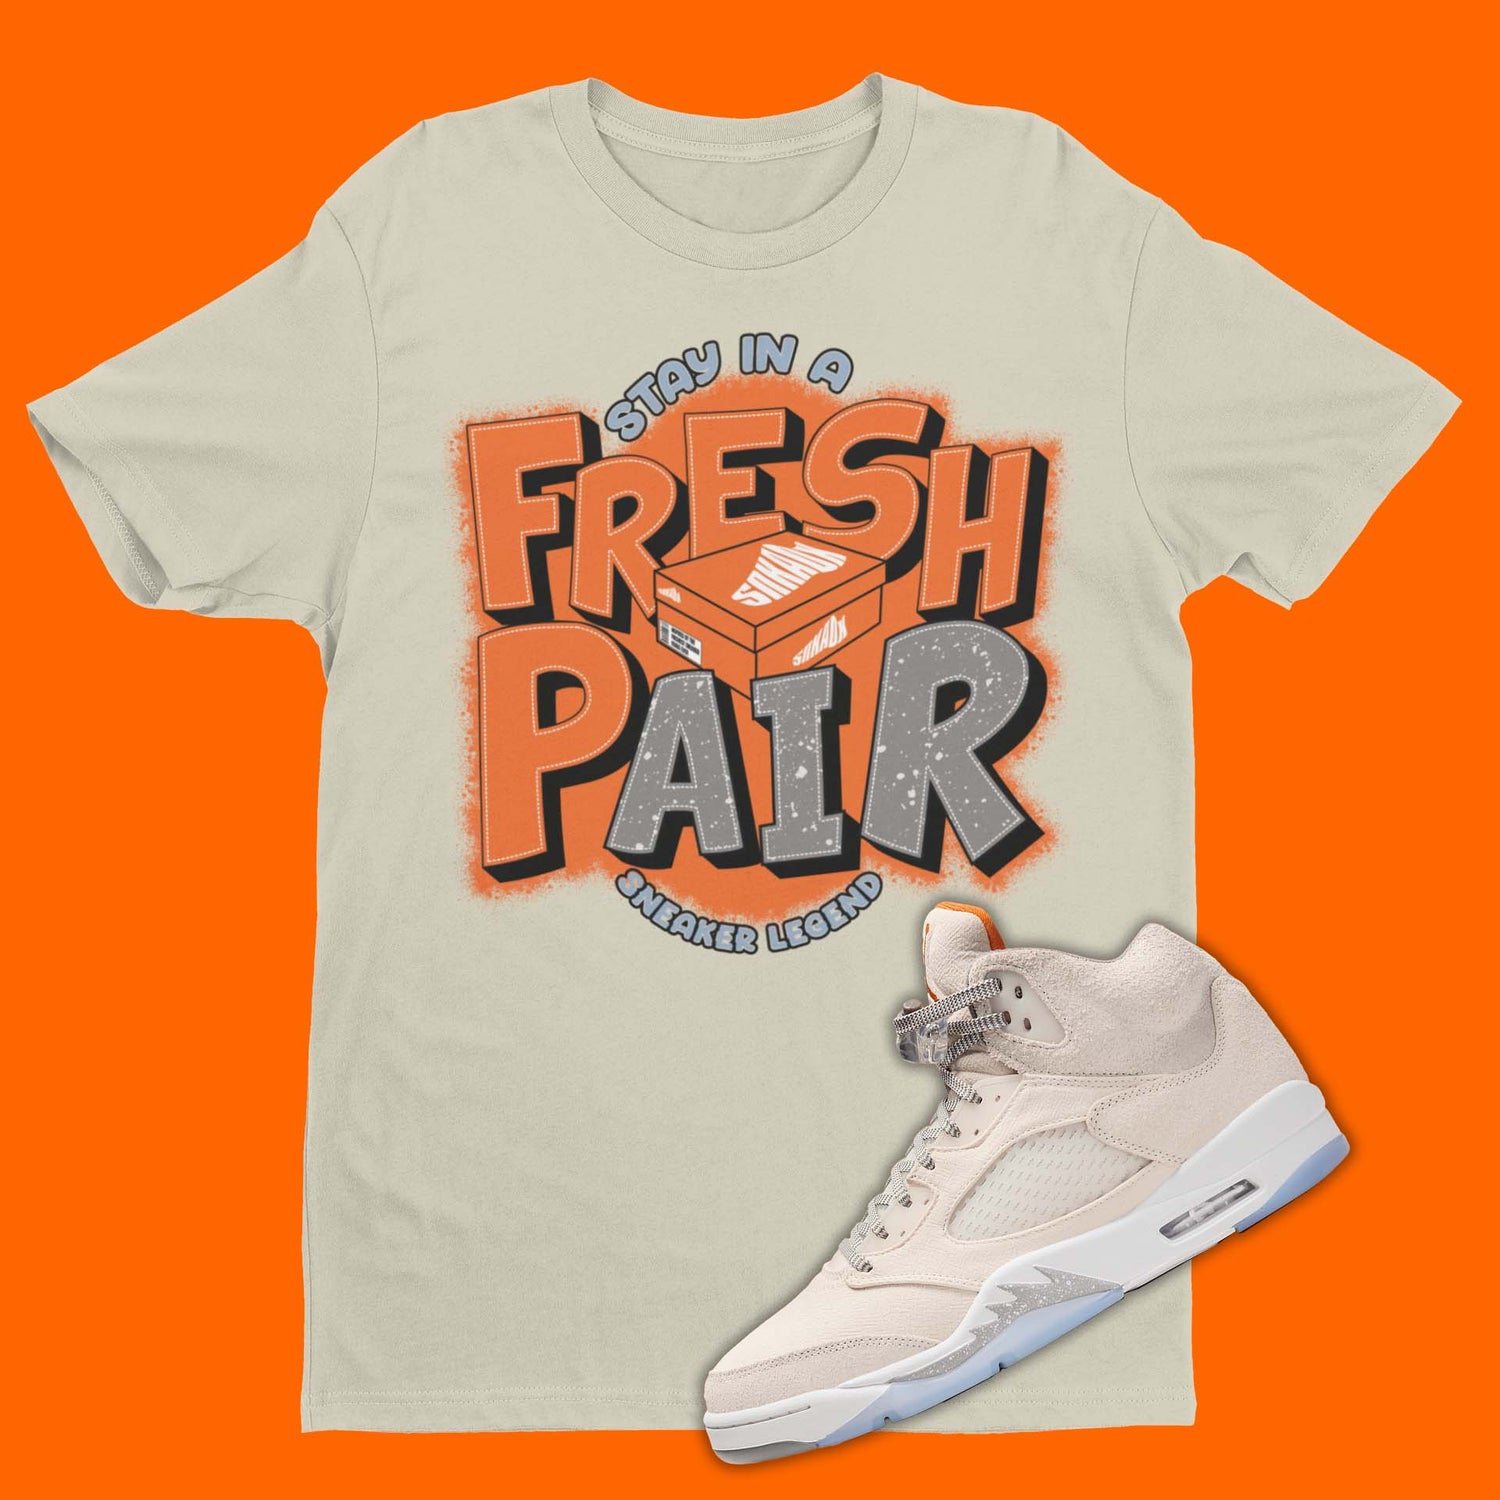 Fresh Pair Air Jordan 5 SE Craft Light Orewood Brown Matching T-Shirt in tan with Stay in a fresh pair and a shoe box on the front.